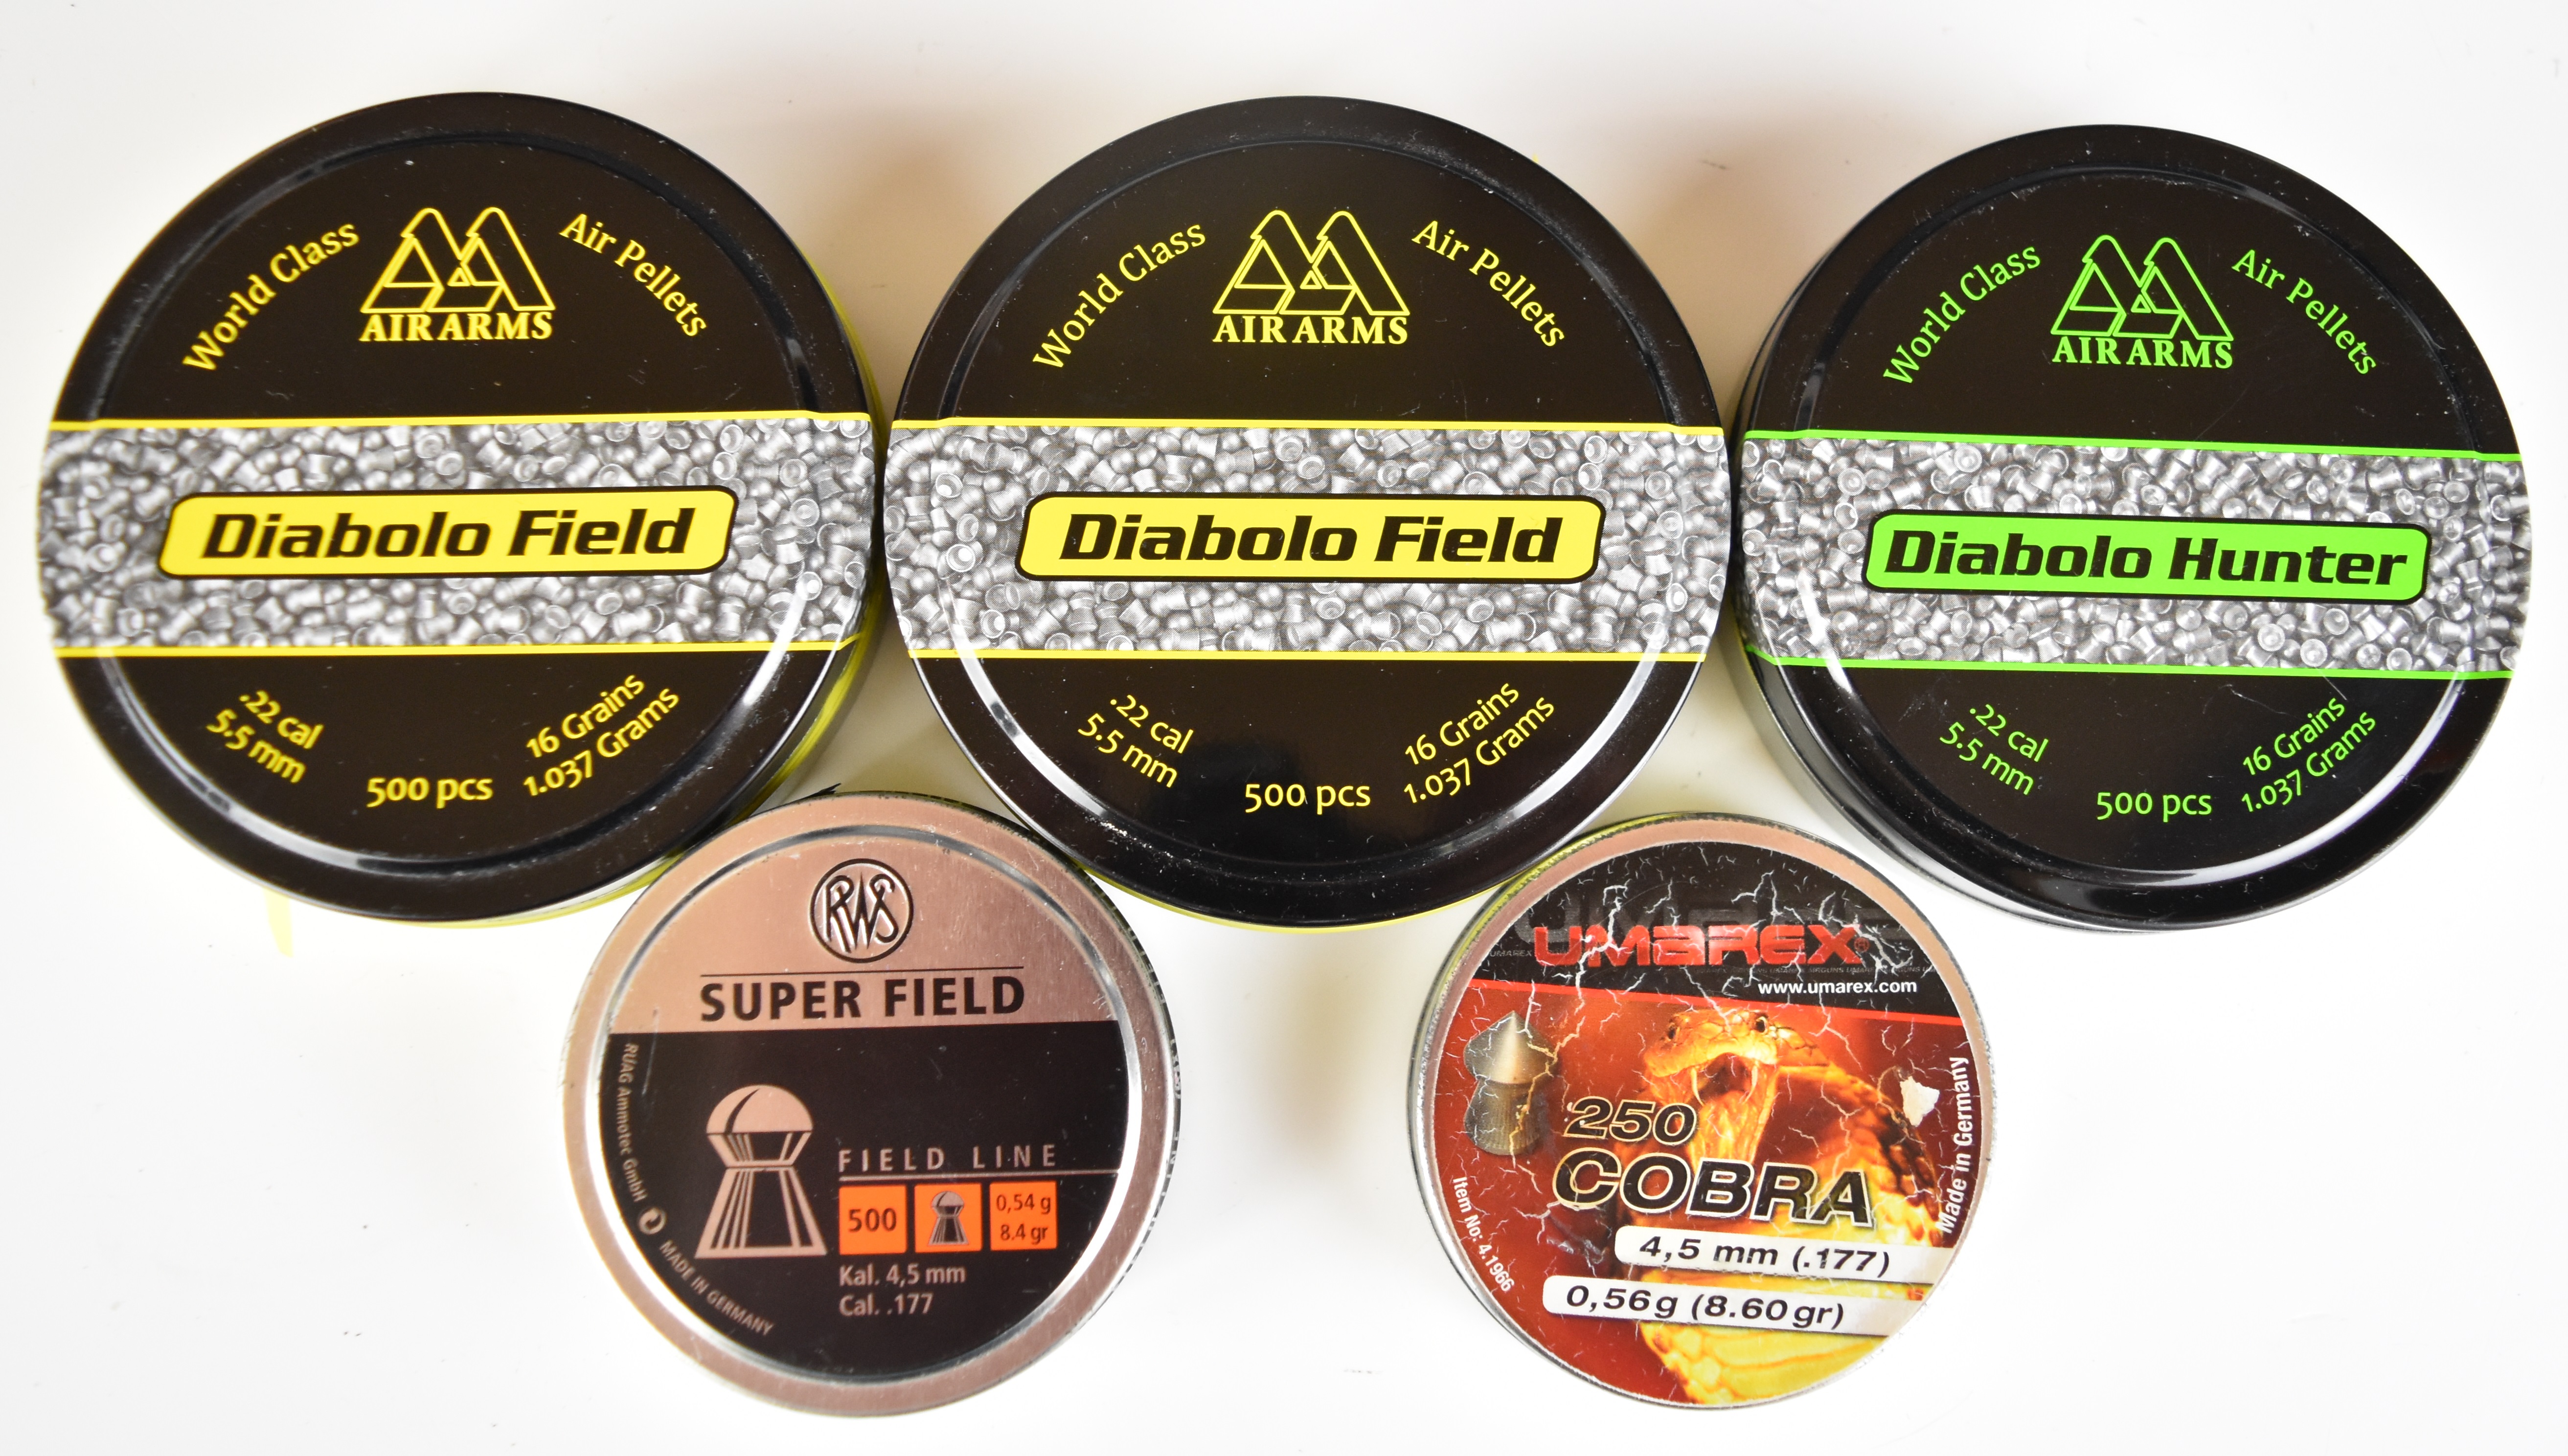 Five tins of .177 and .22 air rifle pellets comprising two Air Arms Diabolo Field, Diabolo Hunter,